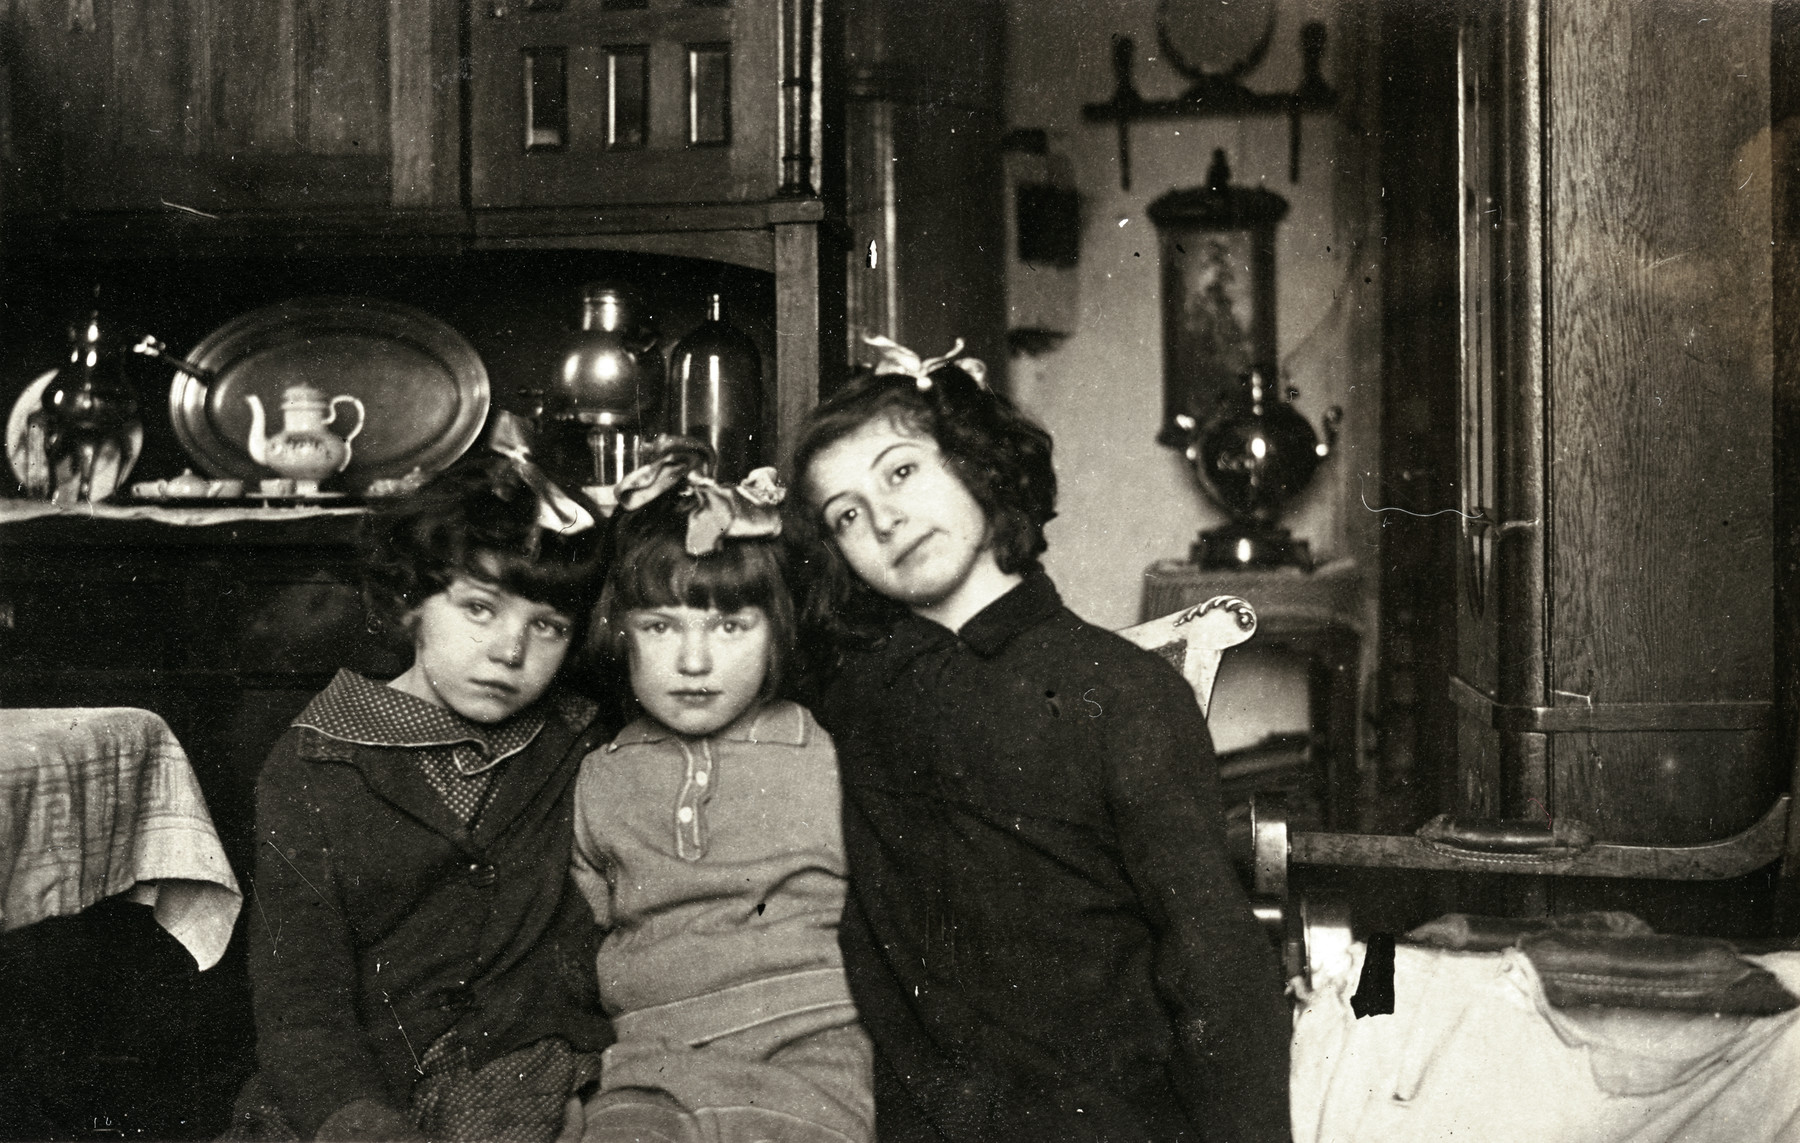 Portrait of three young girls iinside their home.

On the right is Tamara Magid, her cousin Gala Seltzer in the middle and a neighbor on the left.